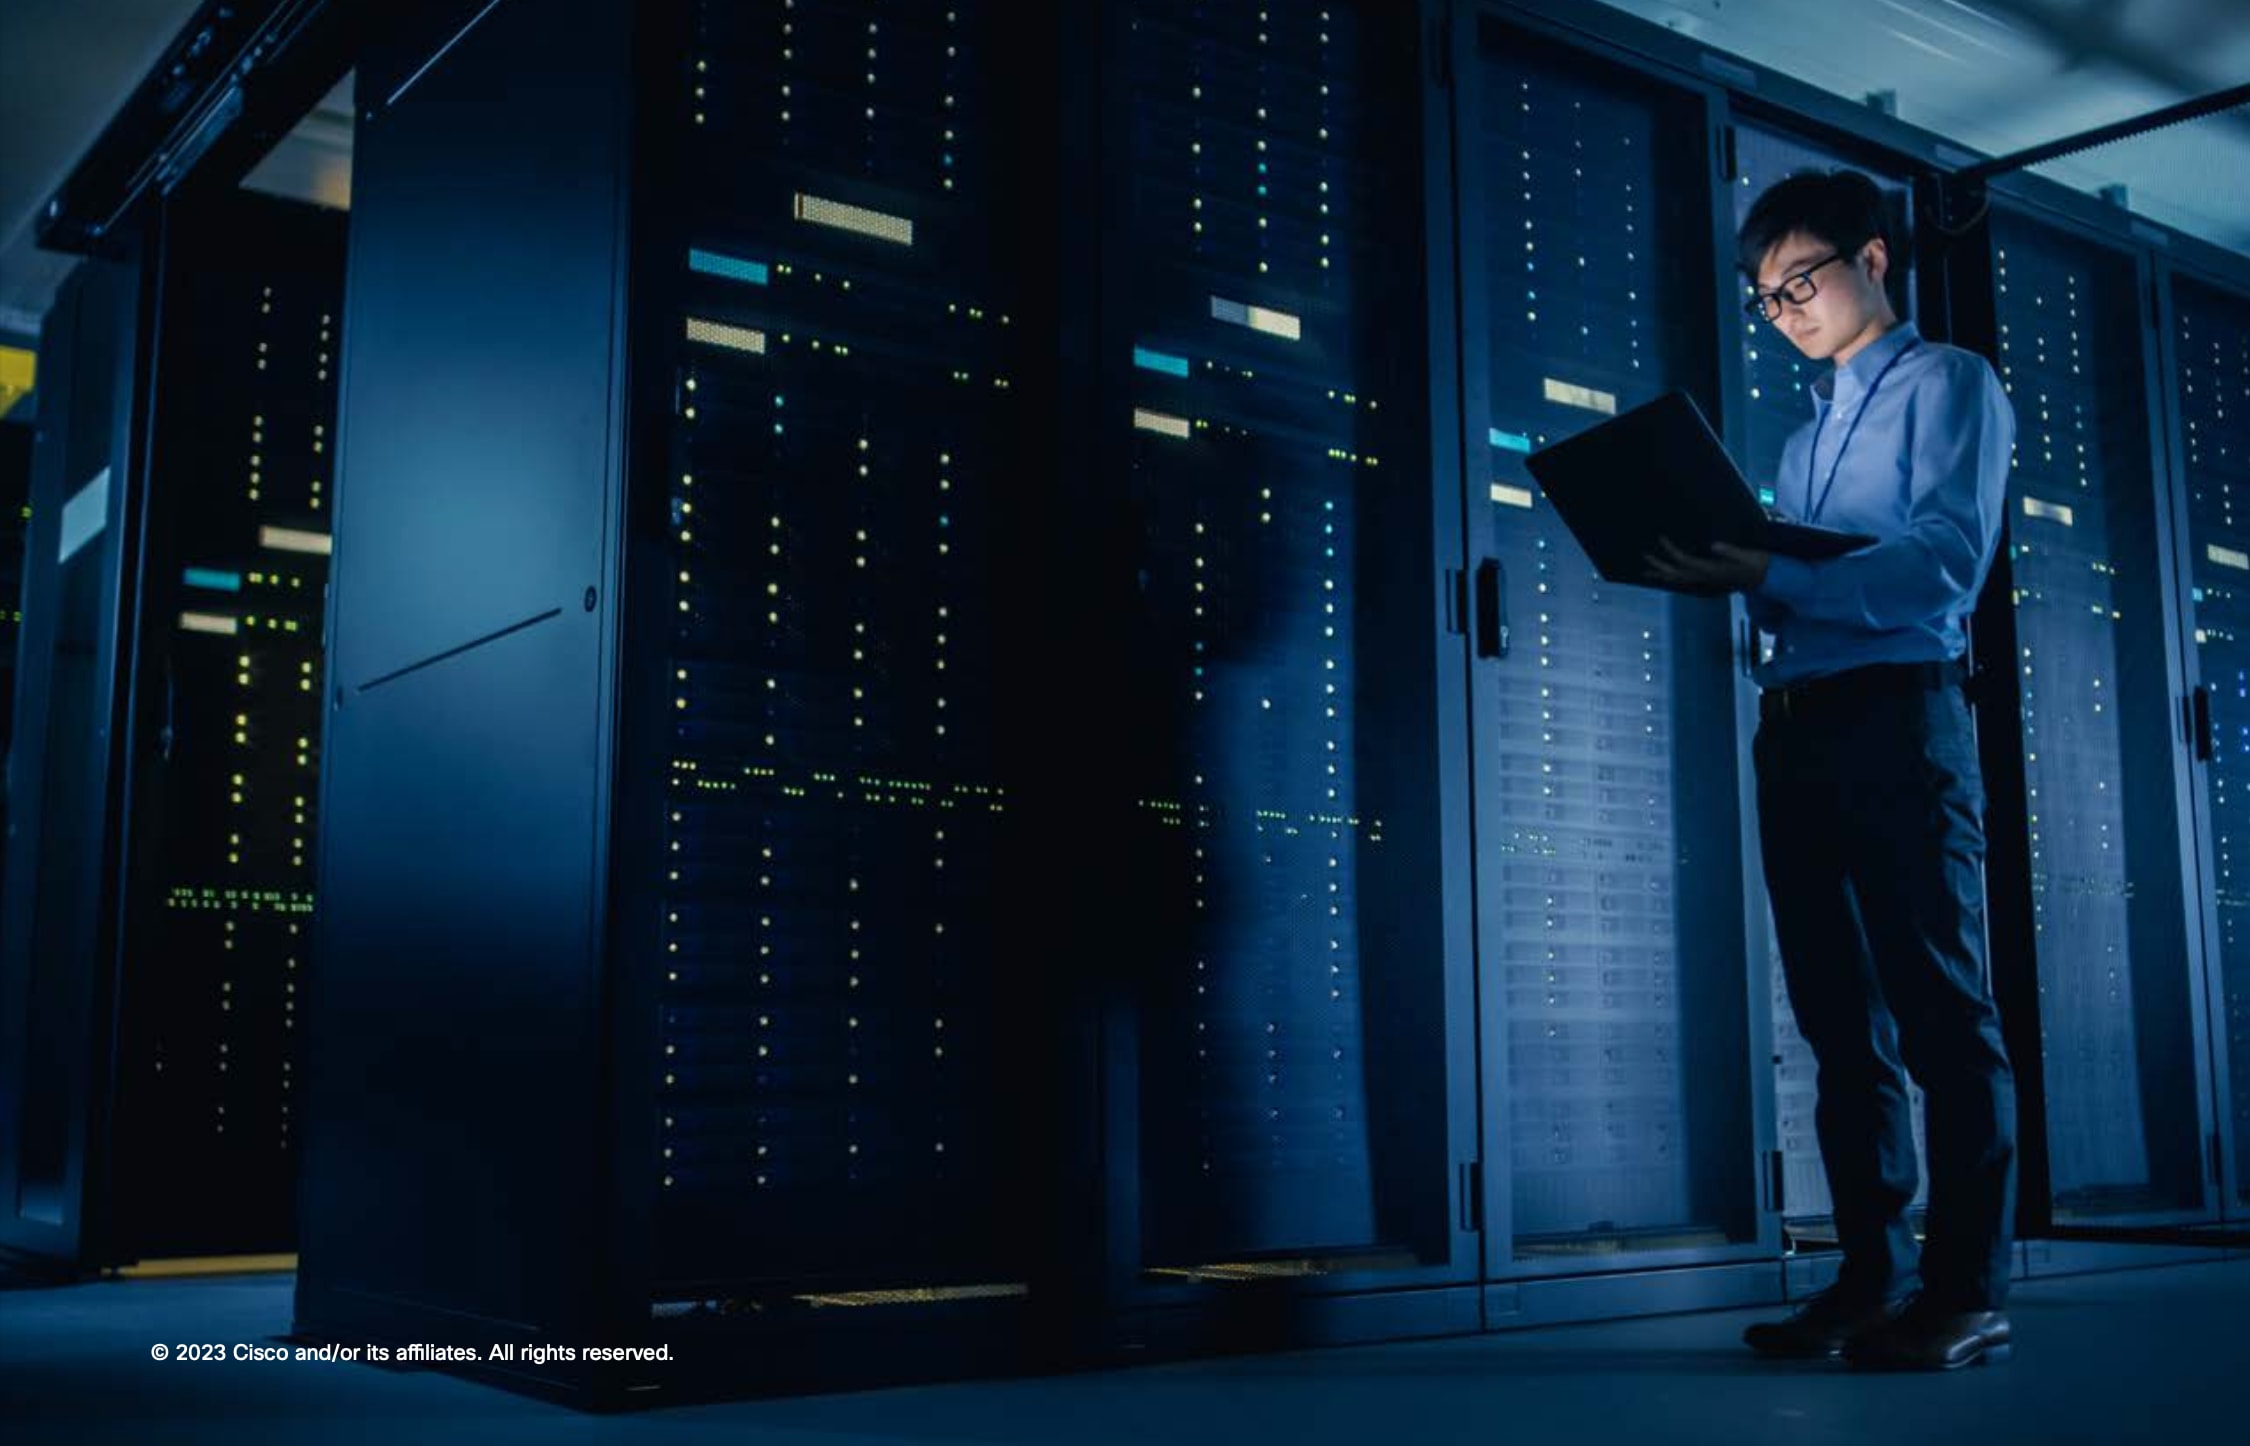 Man with open laptop standing next to data center or rows of server closets